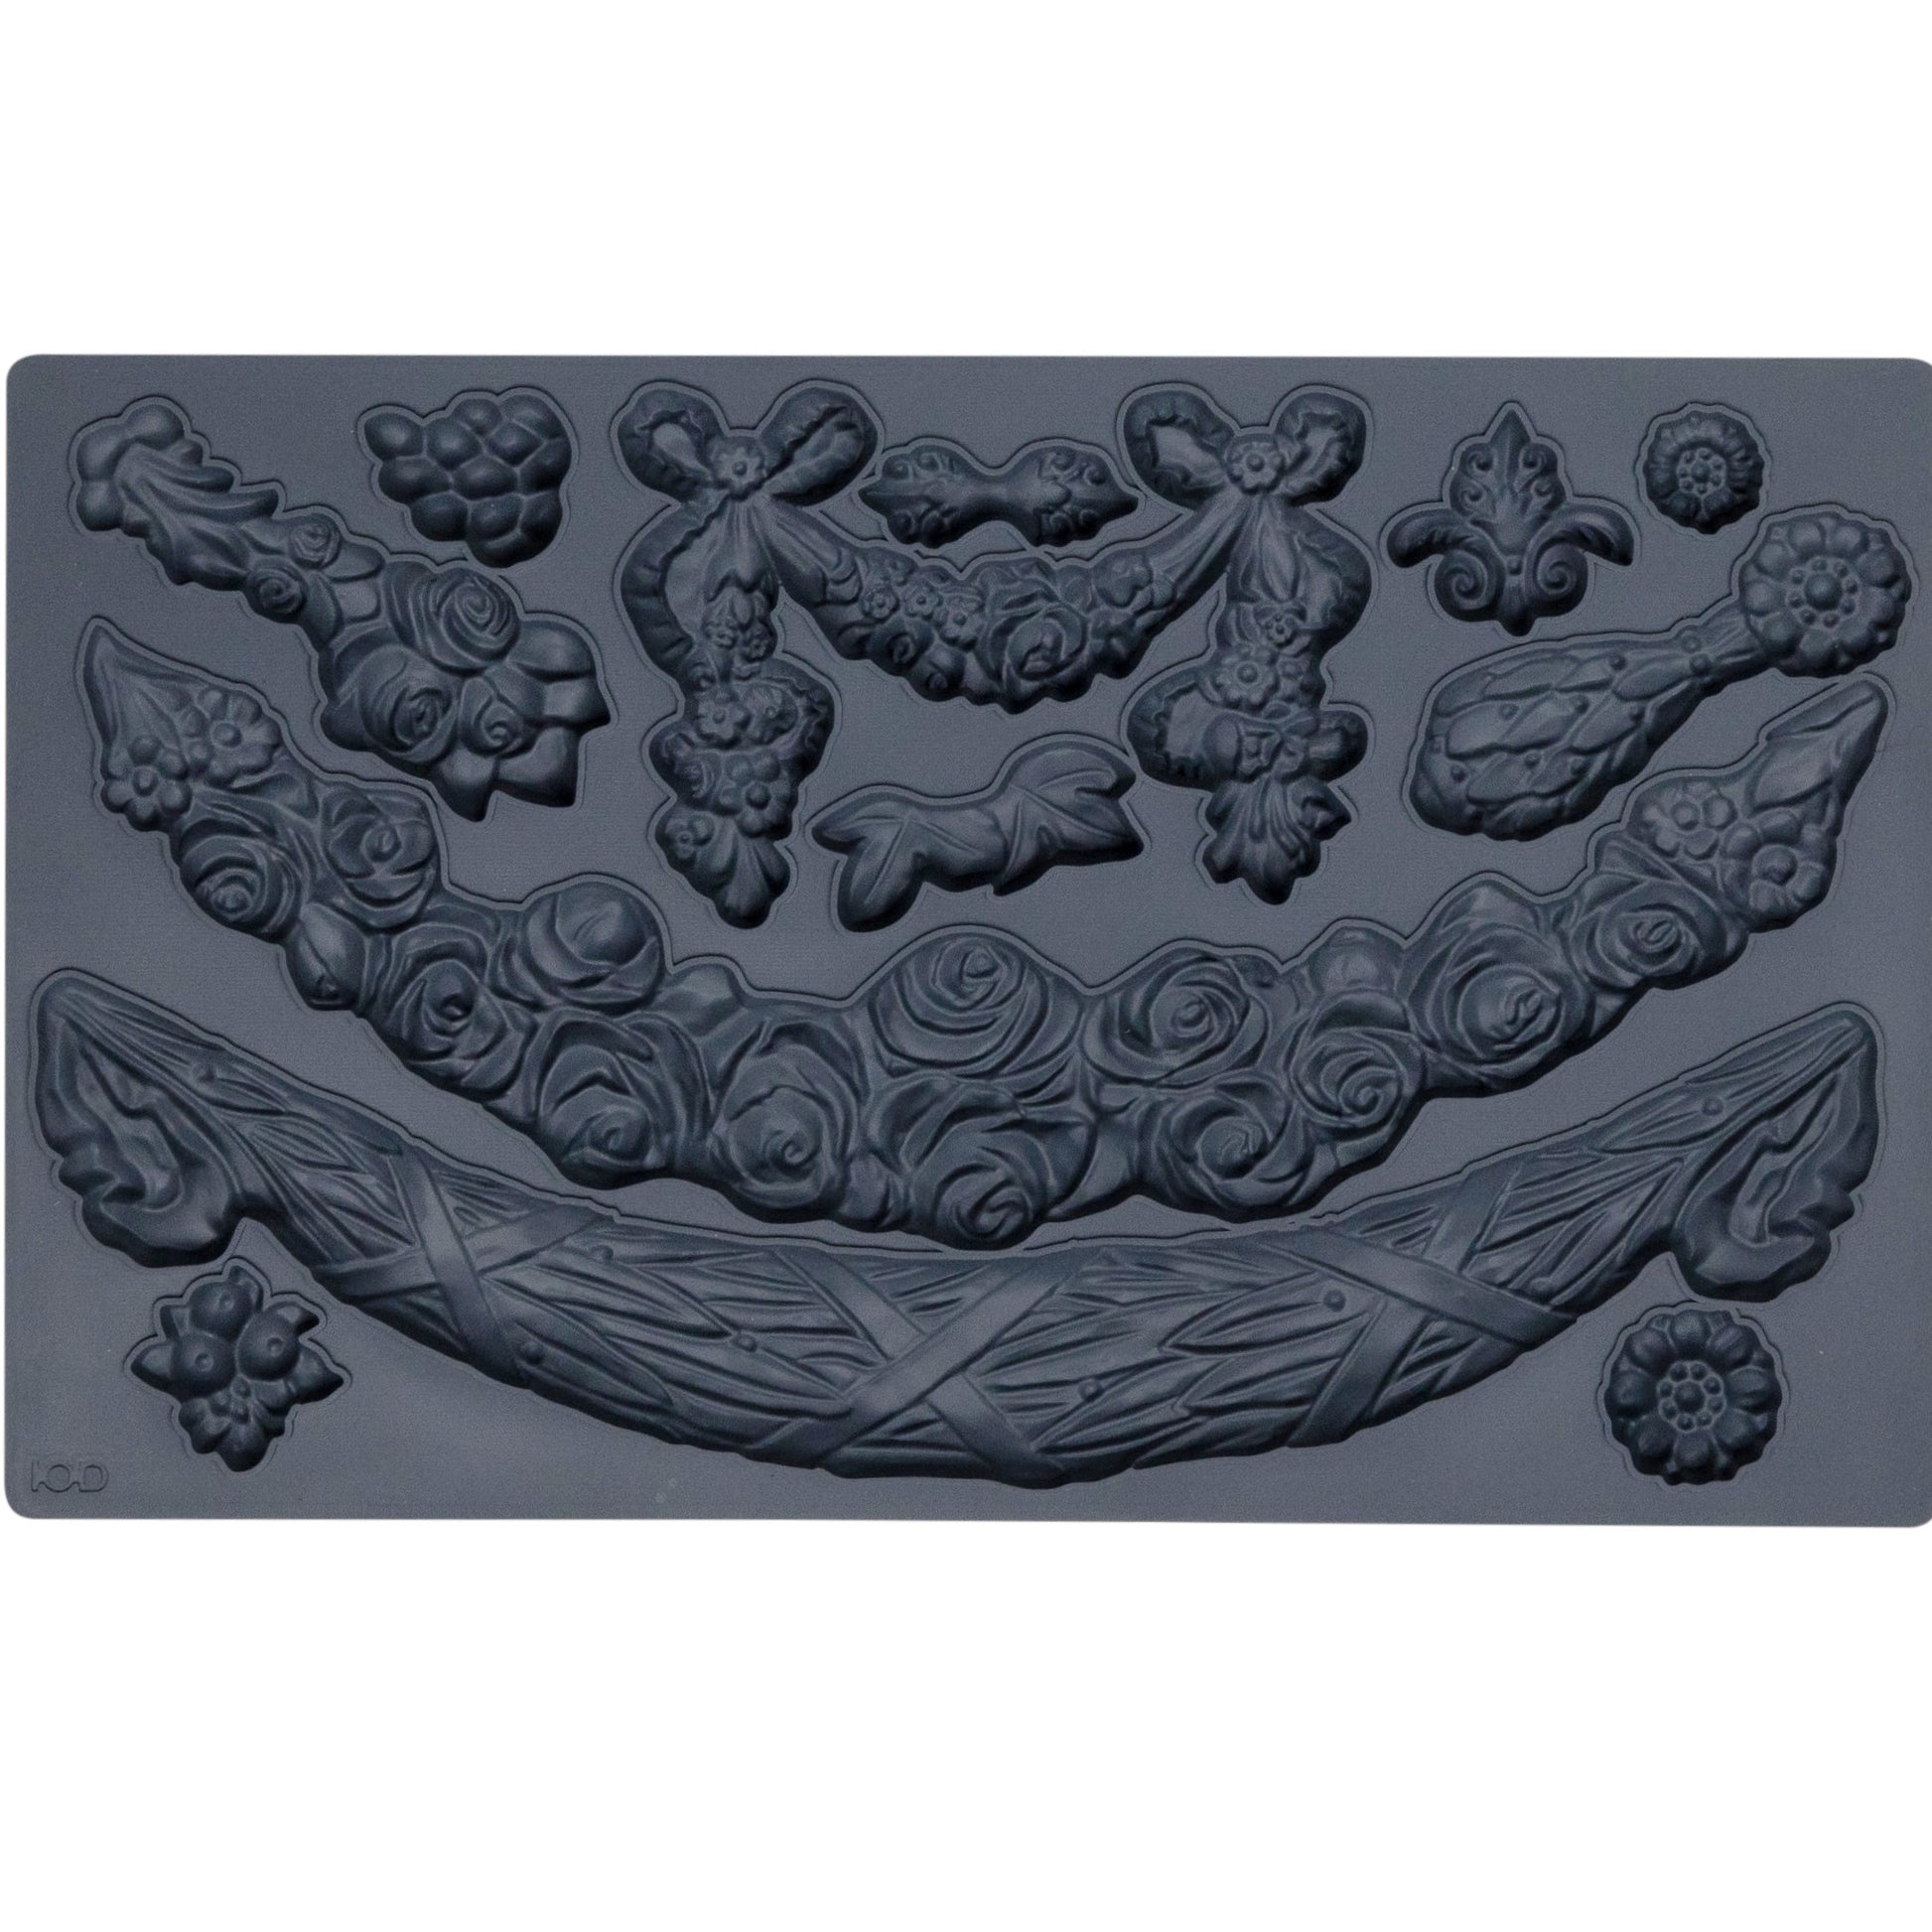 IOD Silicone Mould "Swags" by Iron Orchid Designs available at Milton's Daughter